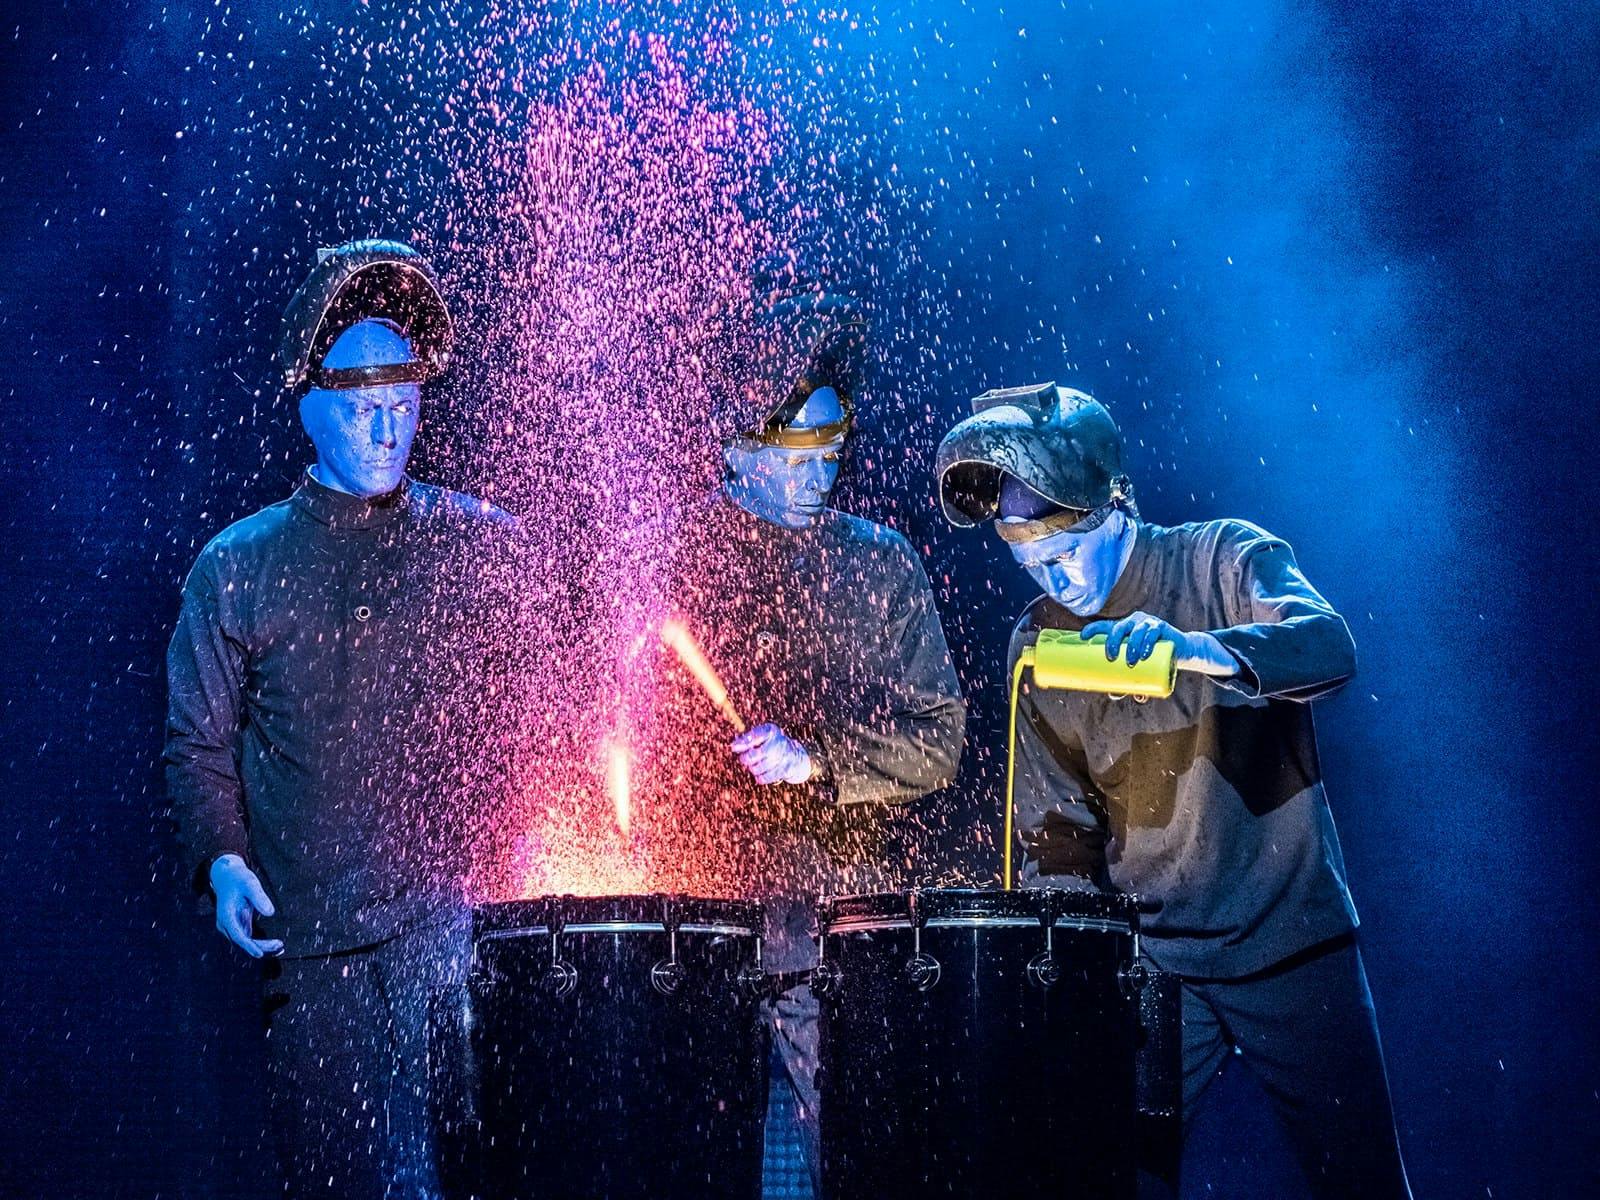 Buy Blue Man Group New York Tickets, See Available Show Times